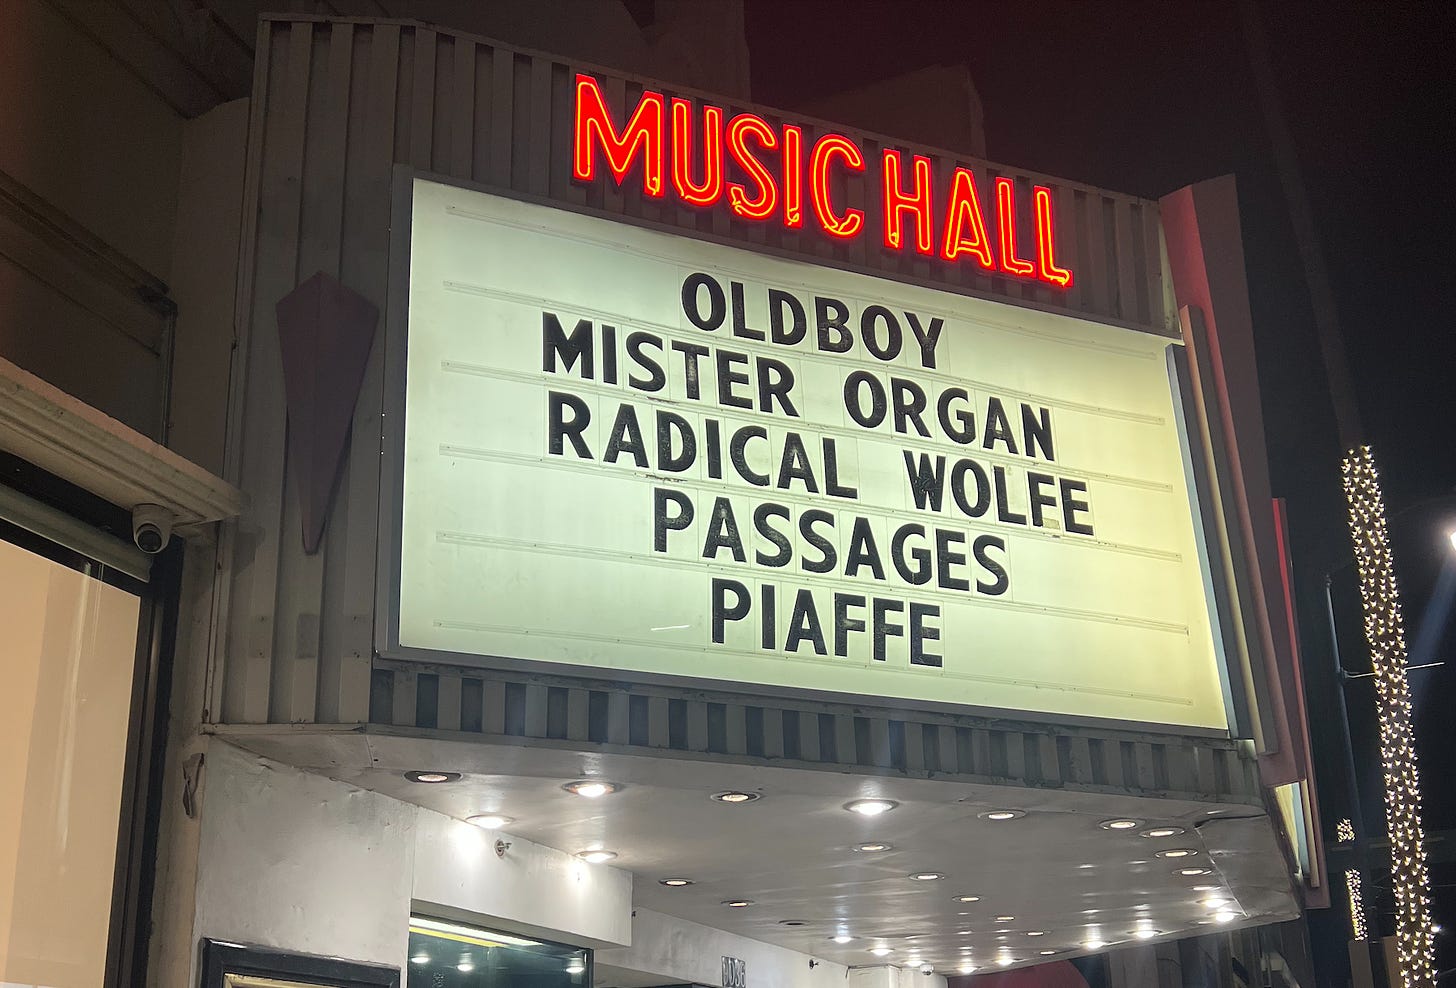 Music Hall sign - Mister Organ is up there by Oldboy